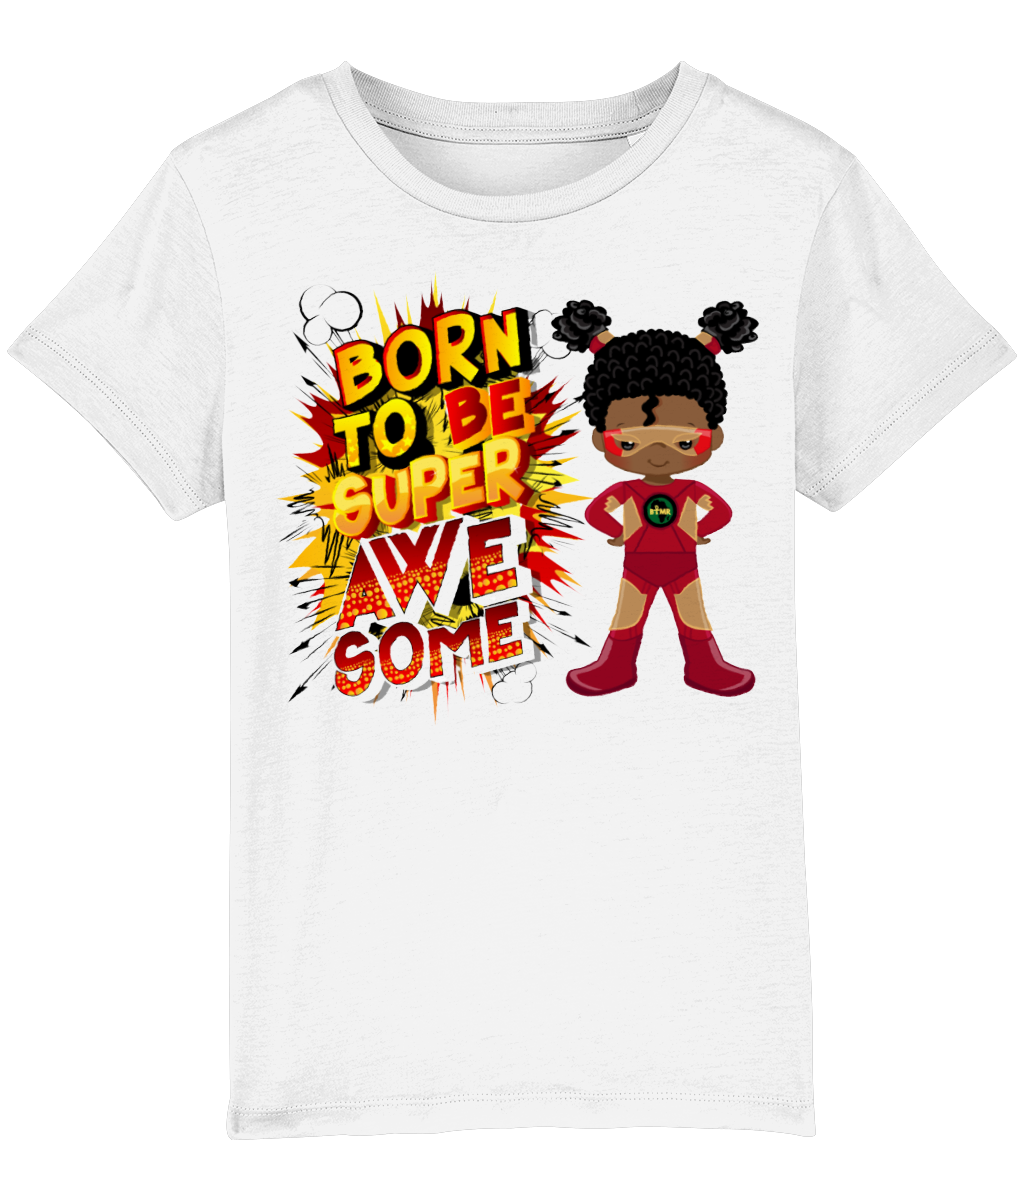 Born To Be Awesome Girls Super Heroine T Shirt